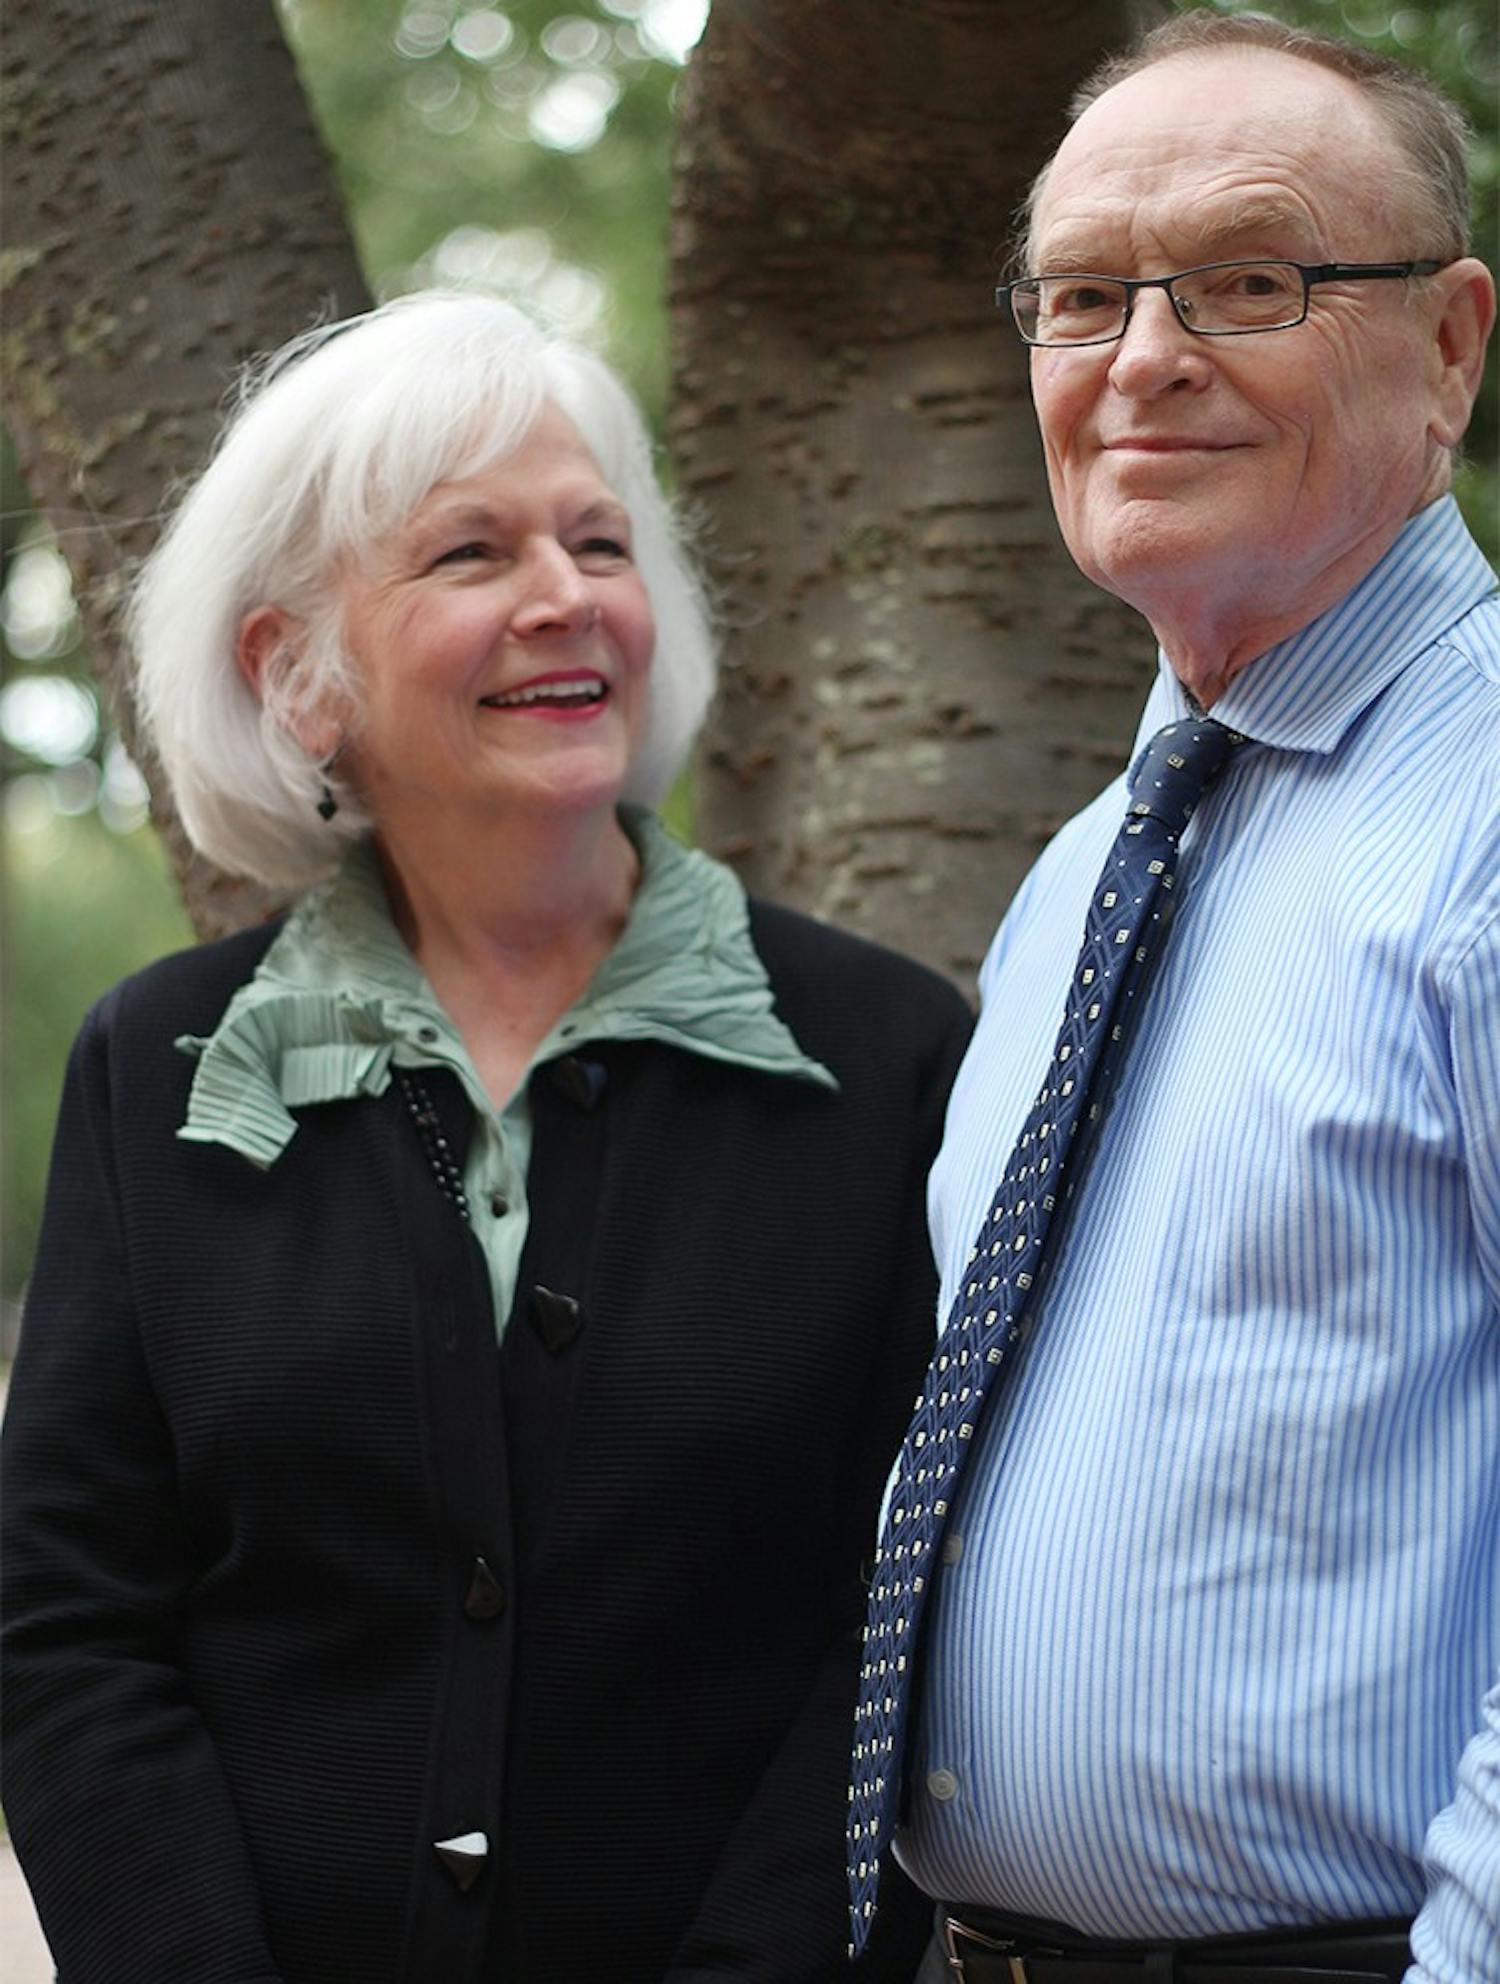 Shirley Ort and Fred Clark are the founders and directors of the Carolina Covenant financial aid program. Ort is in charge of the university's financial aid department and Clark is a professor who has been teaching here for 47 years (teaches classes on Brazilian studies).

The Carolina Covenant program was founded ten years ago and is a need-based program that covers all school-related costs for the students it serves, including the cost of living. It has improved UNC's diversity and has served as a model for other financial aid programs around the country (however, Shirley pointed out that ours has been the most successful because many other schools who have tried it have dropped the program because it is so expensive). 